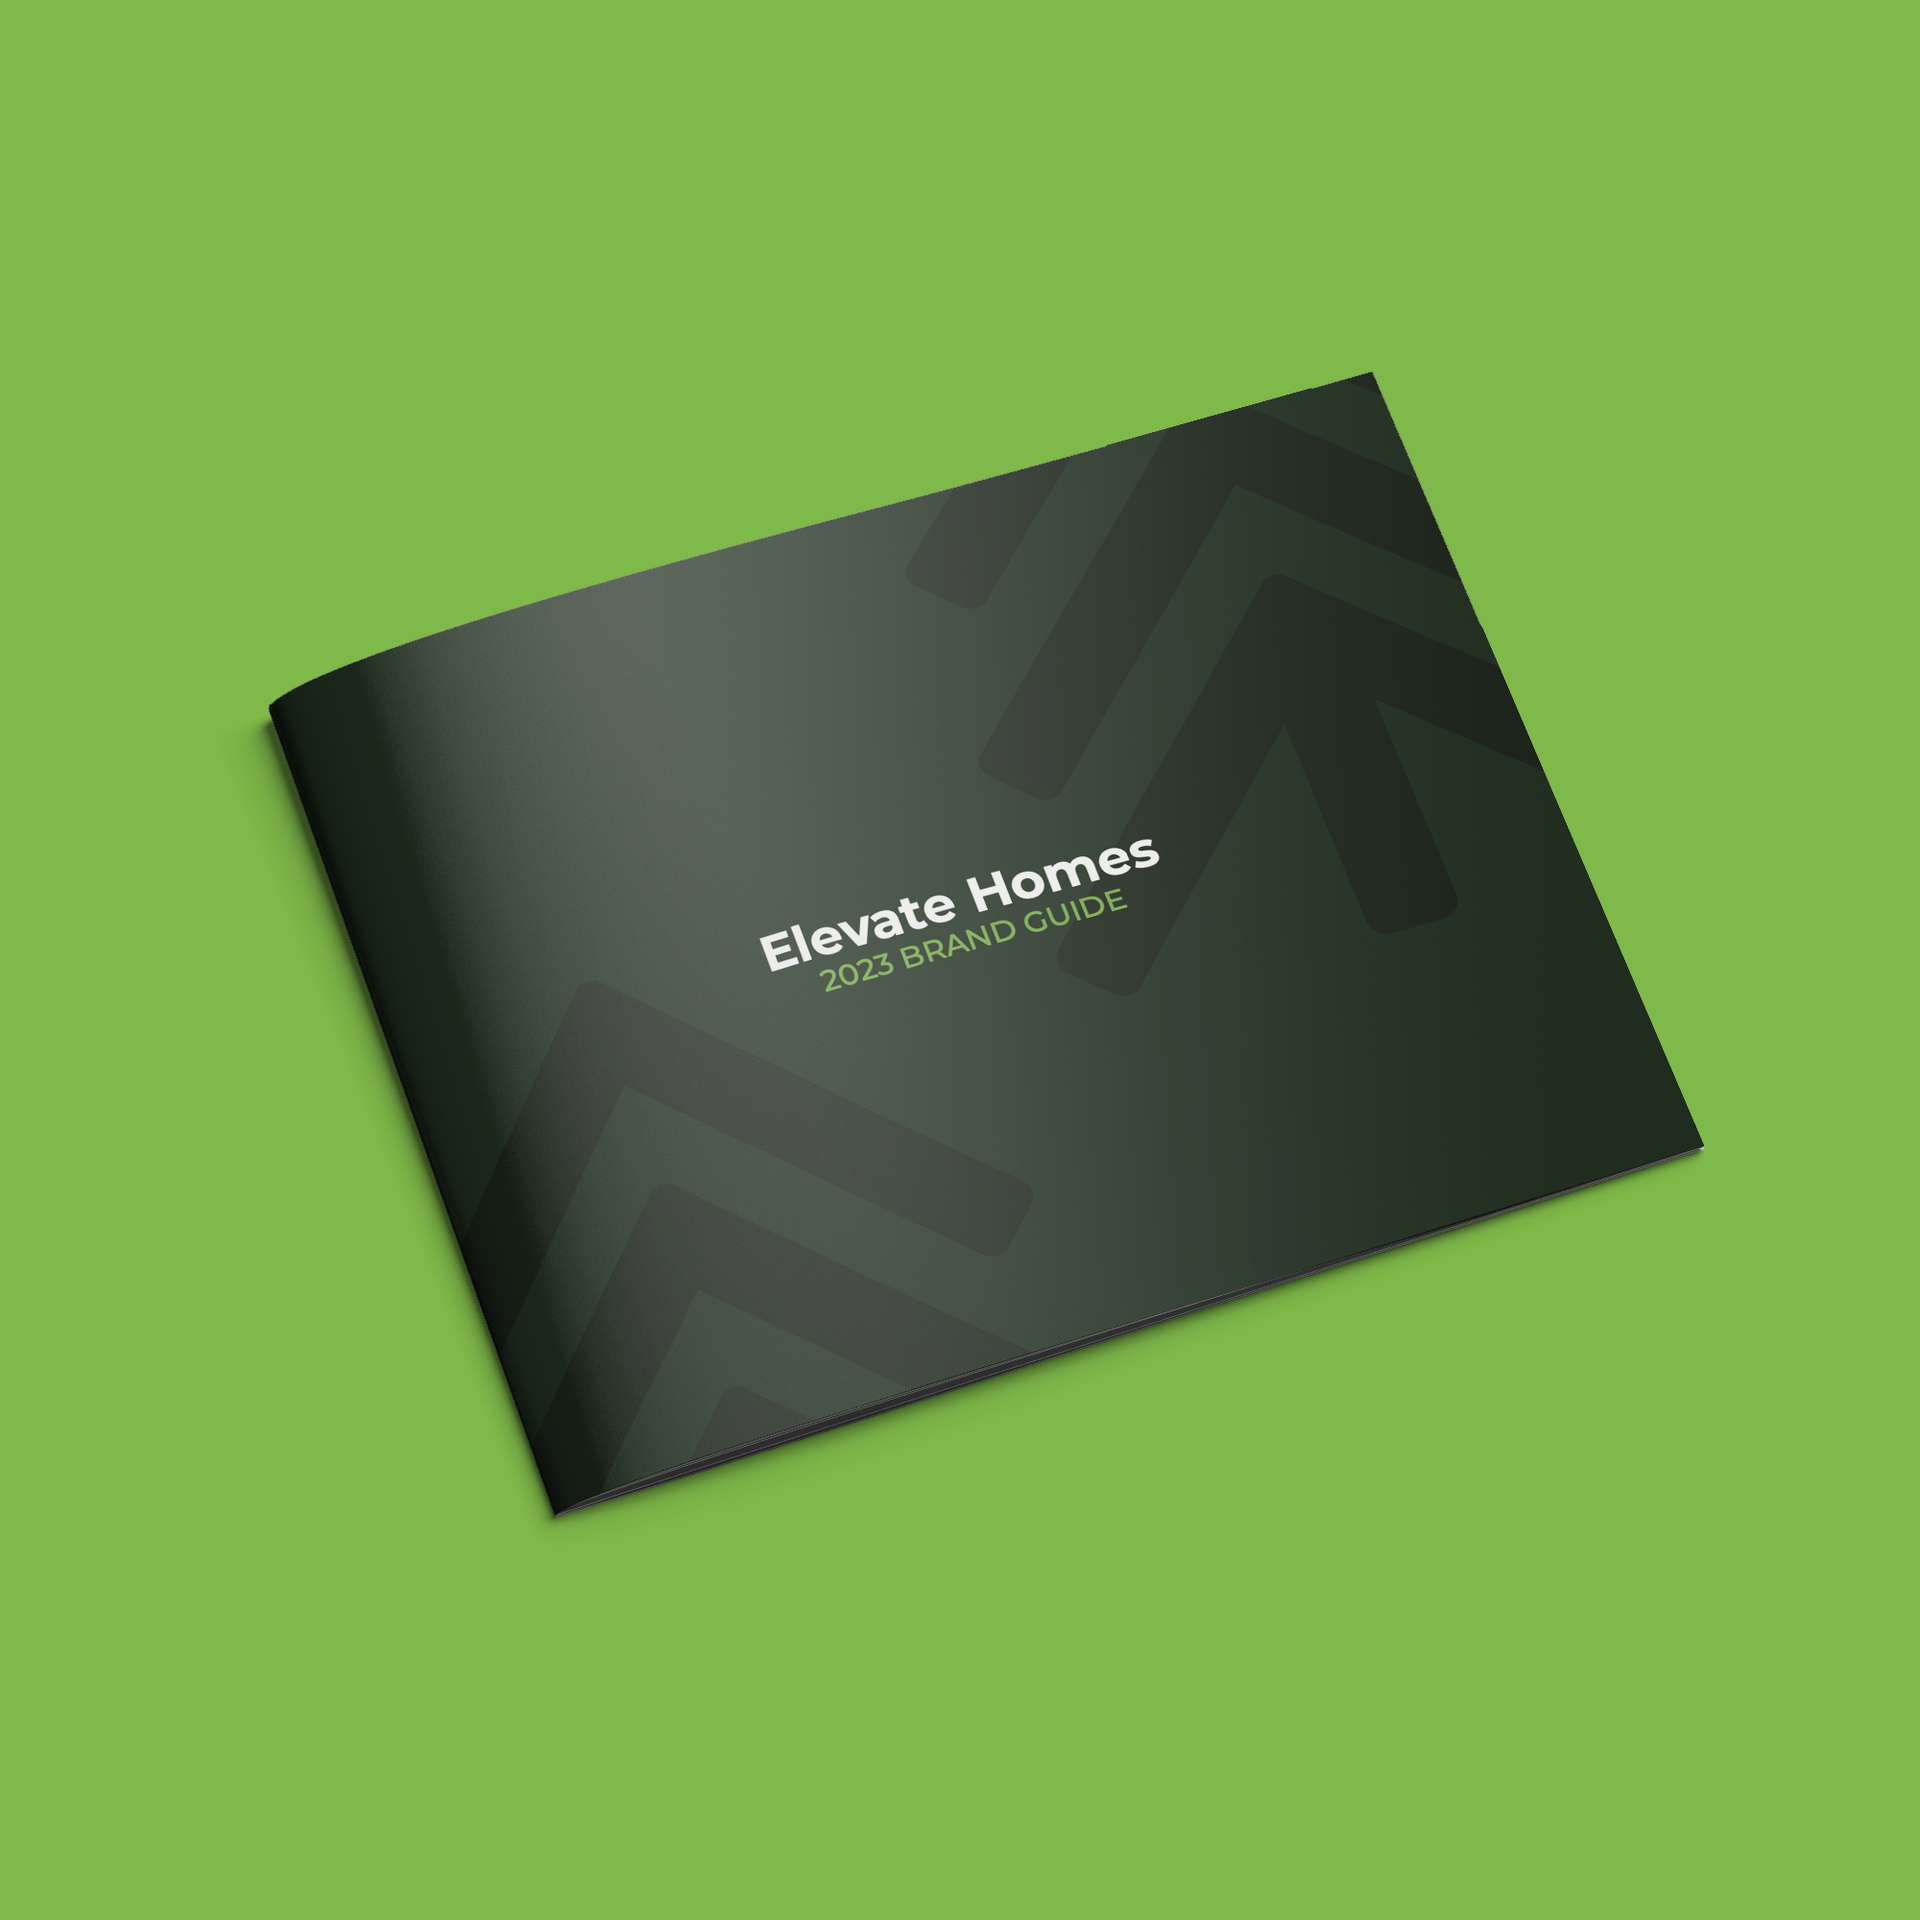 A black brochure for elevate homes is sitting on a green surface.